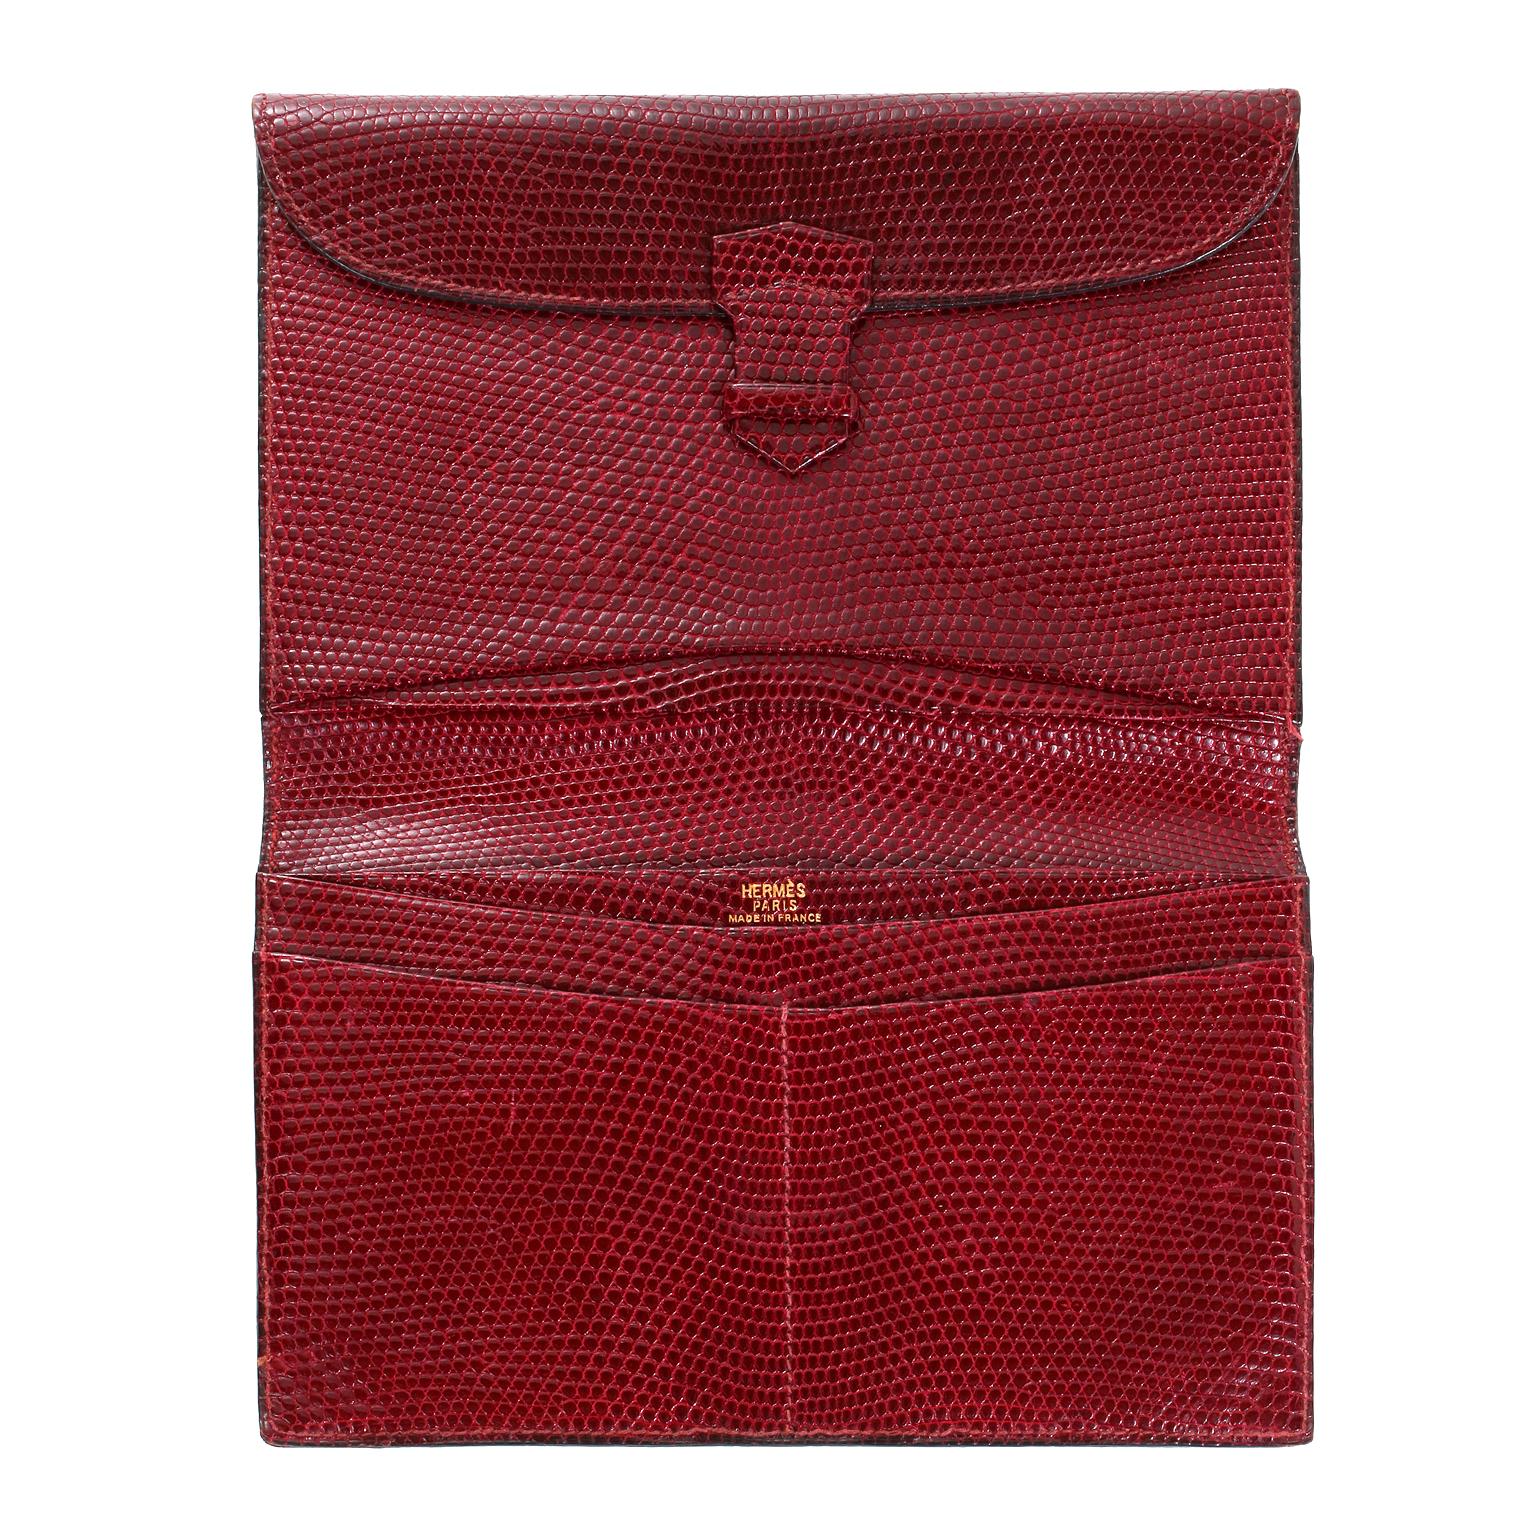 This authentic Hermès Bordeaux Lizard Billfold is in very good vintage condition with slight wear on the corners.  Suitable for either a man or a woman, this timeless wallet is a beautiful collectible.  
Bordeaux lizard skin billfold has an interior